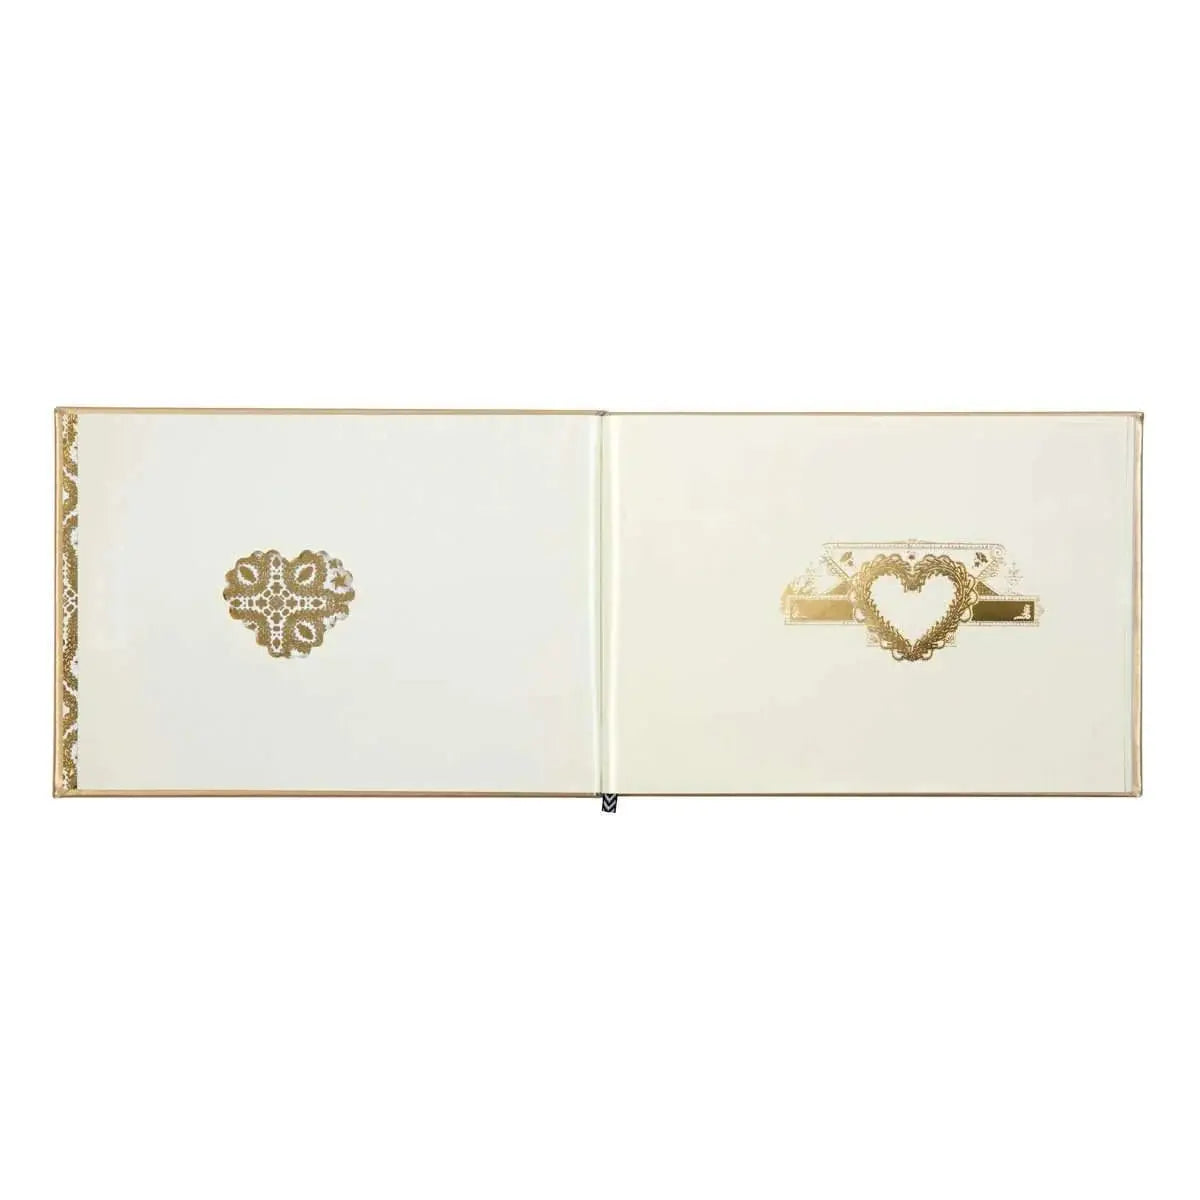 Inside of Hachette Christian Lacroix Gold Paseo Guest Book